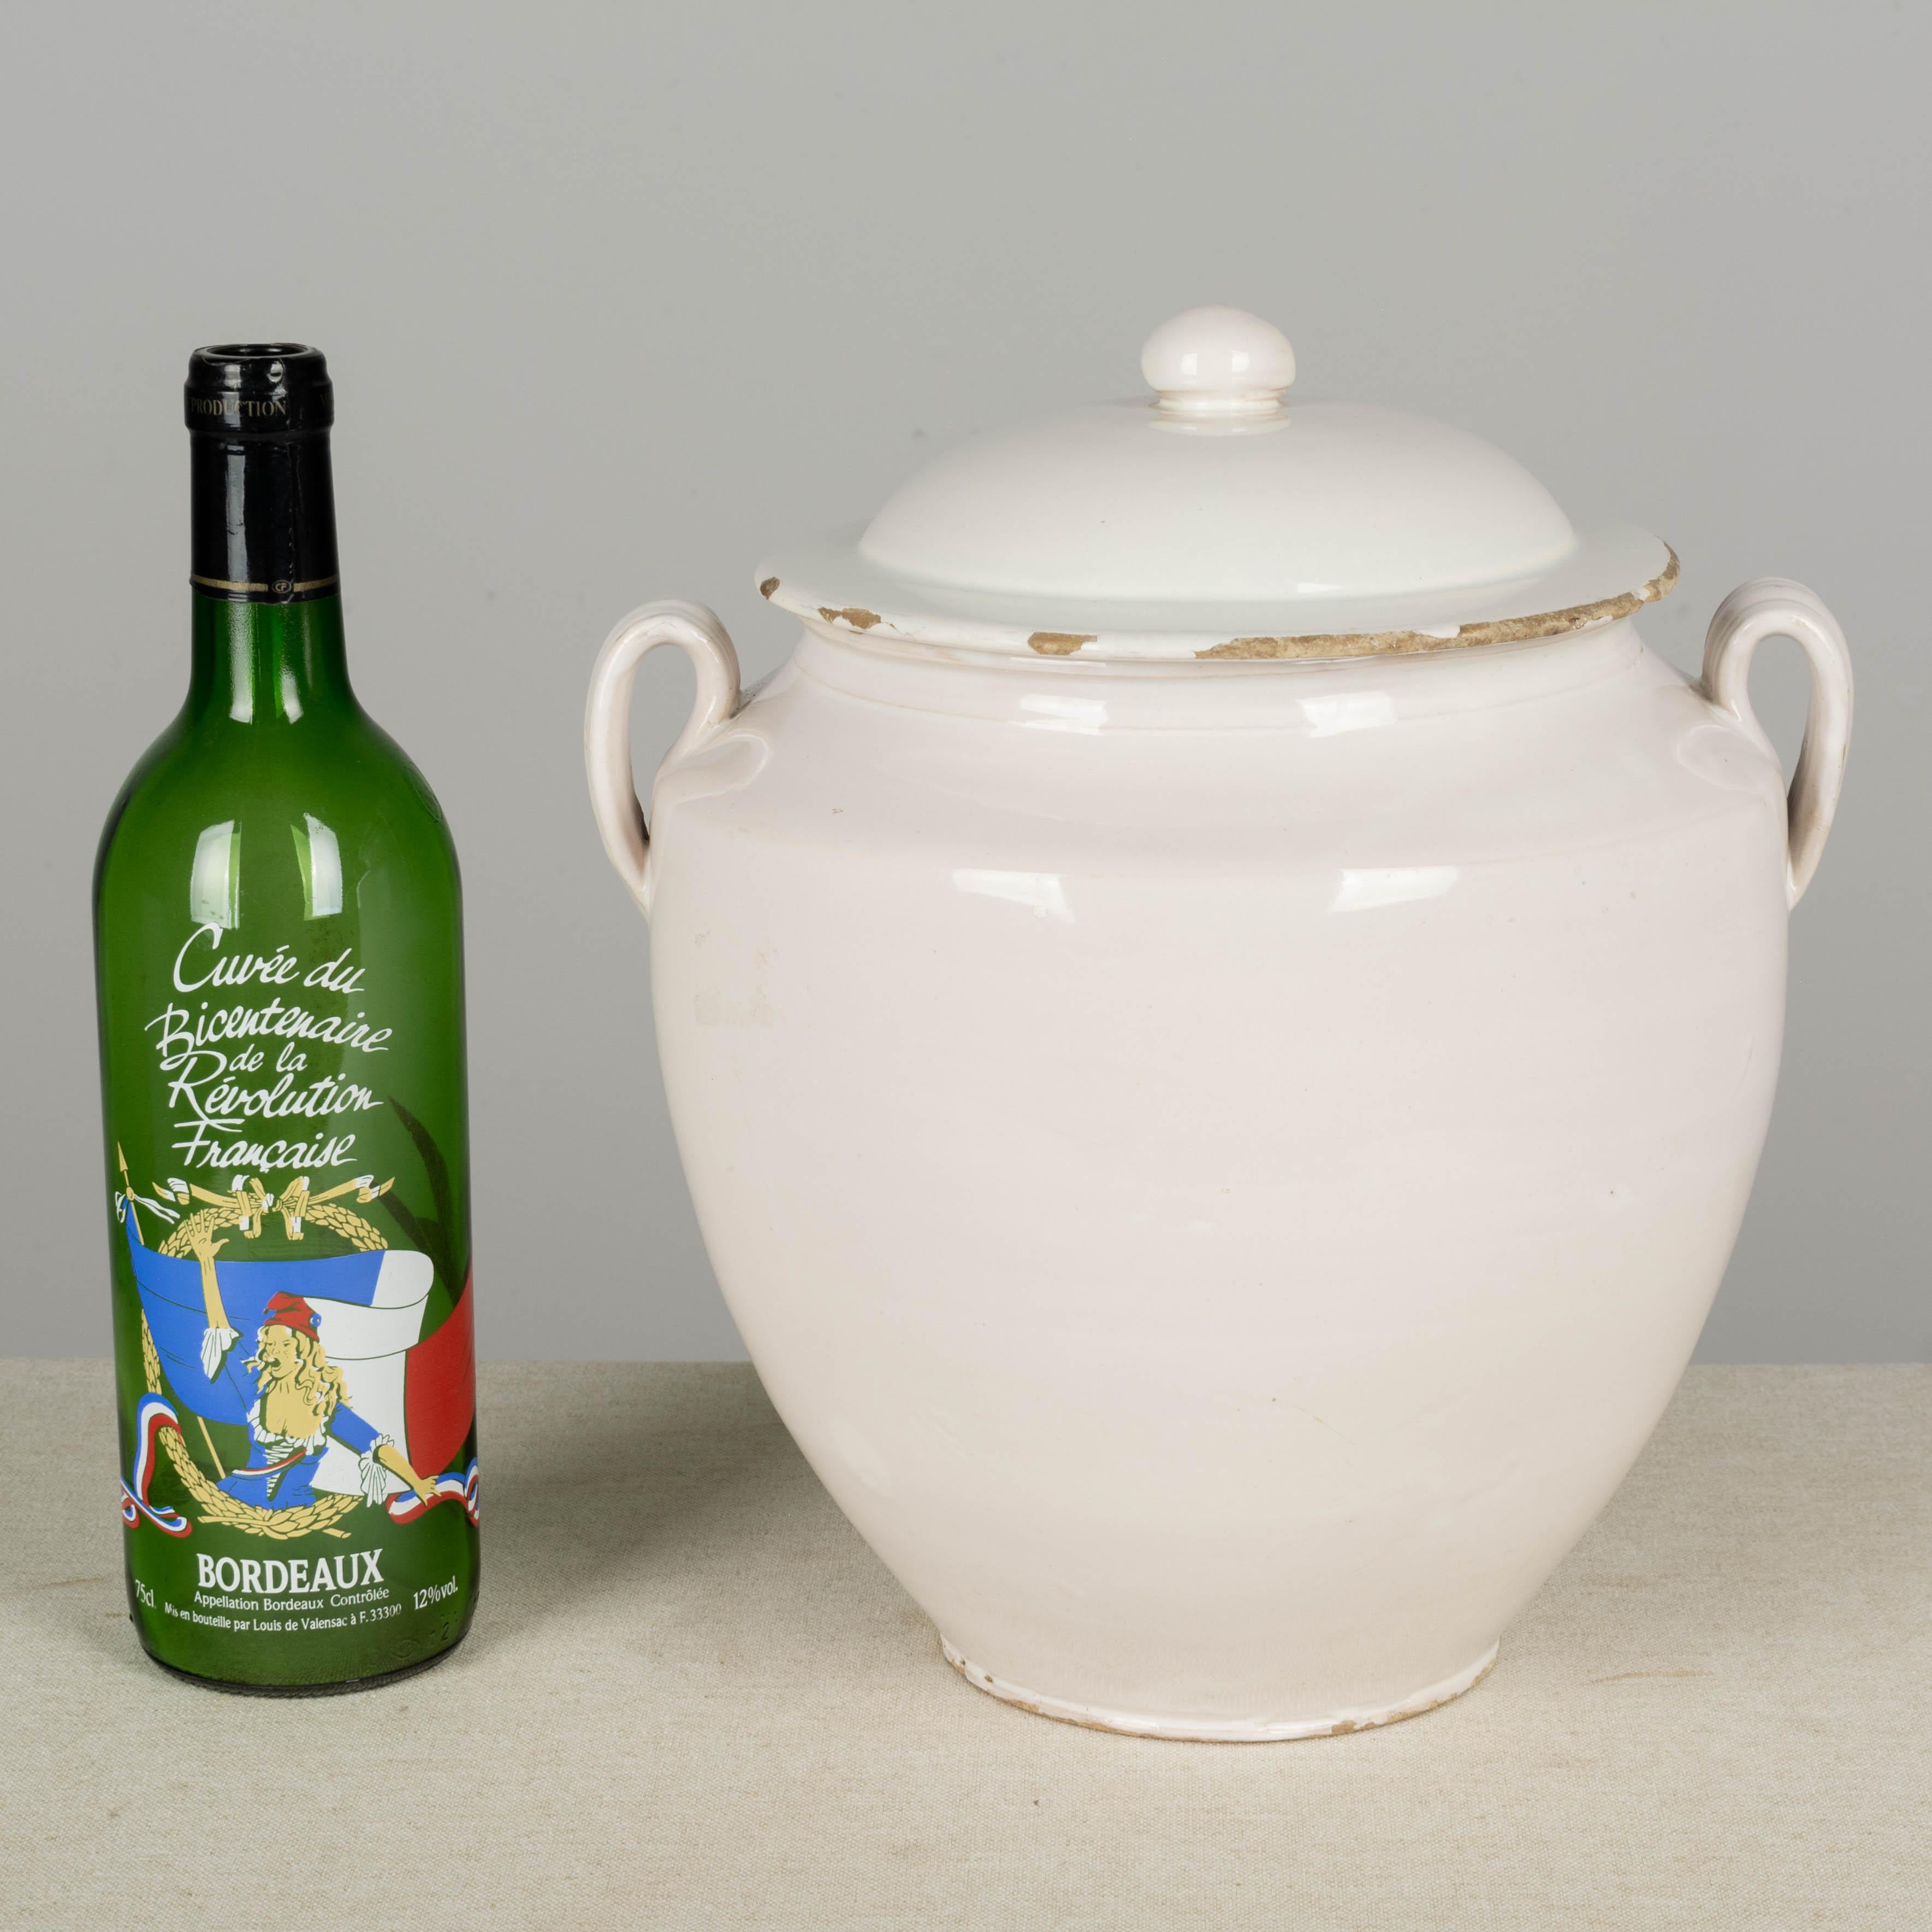 A 19th century French earthenware lidded confit pot with rare white terre de fer, or ironstone glaze from Martres-Tolosone, a small village in Southwest France. In good condition with a minor chips to rim and the underside of the lid. This ordinary